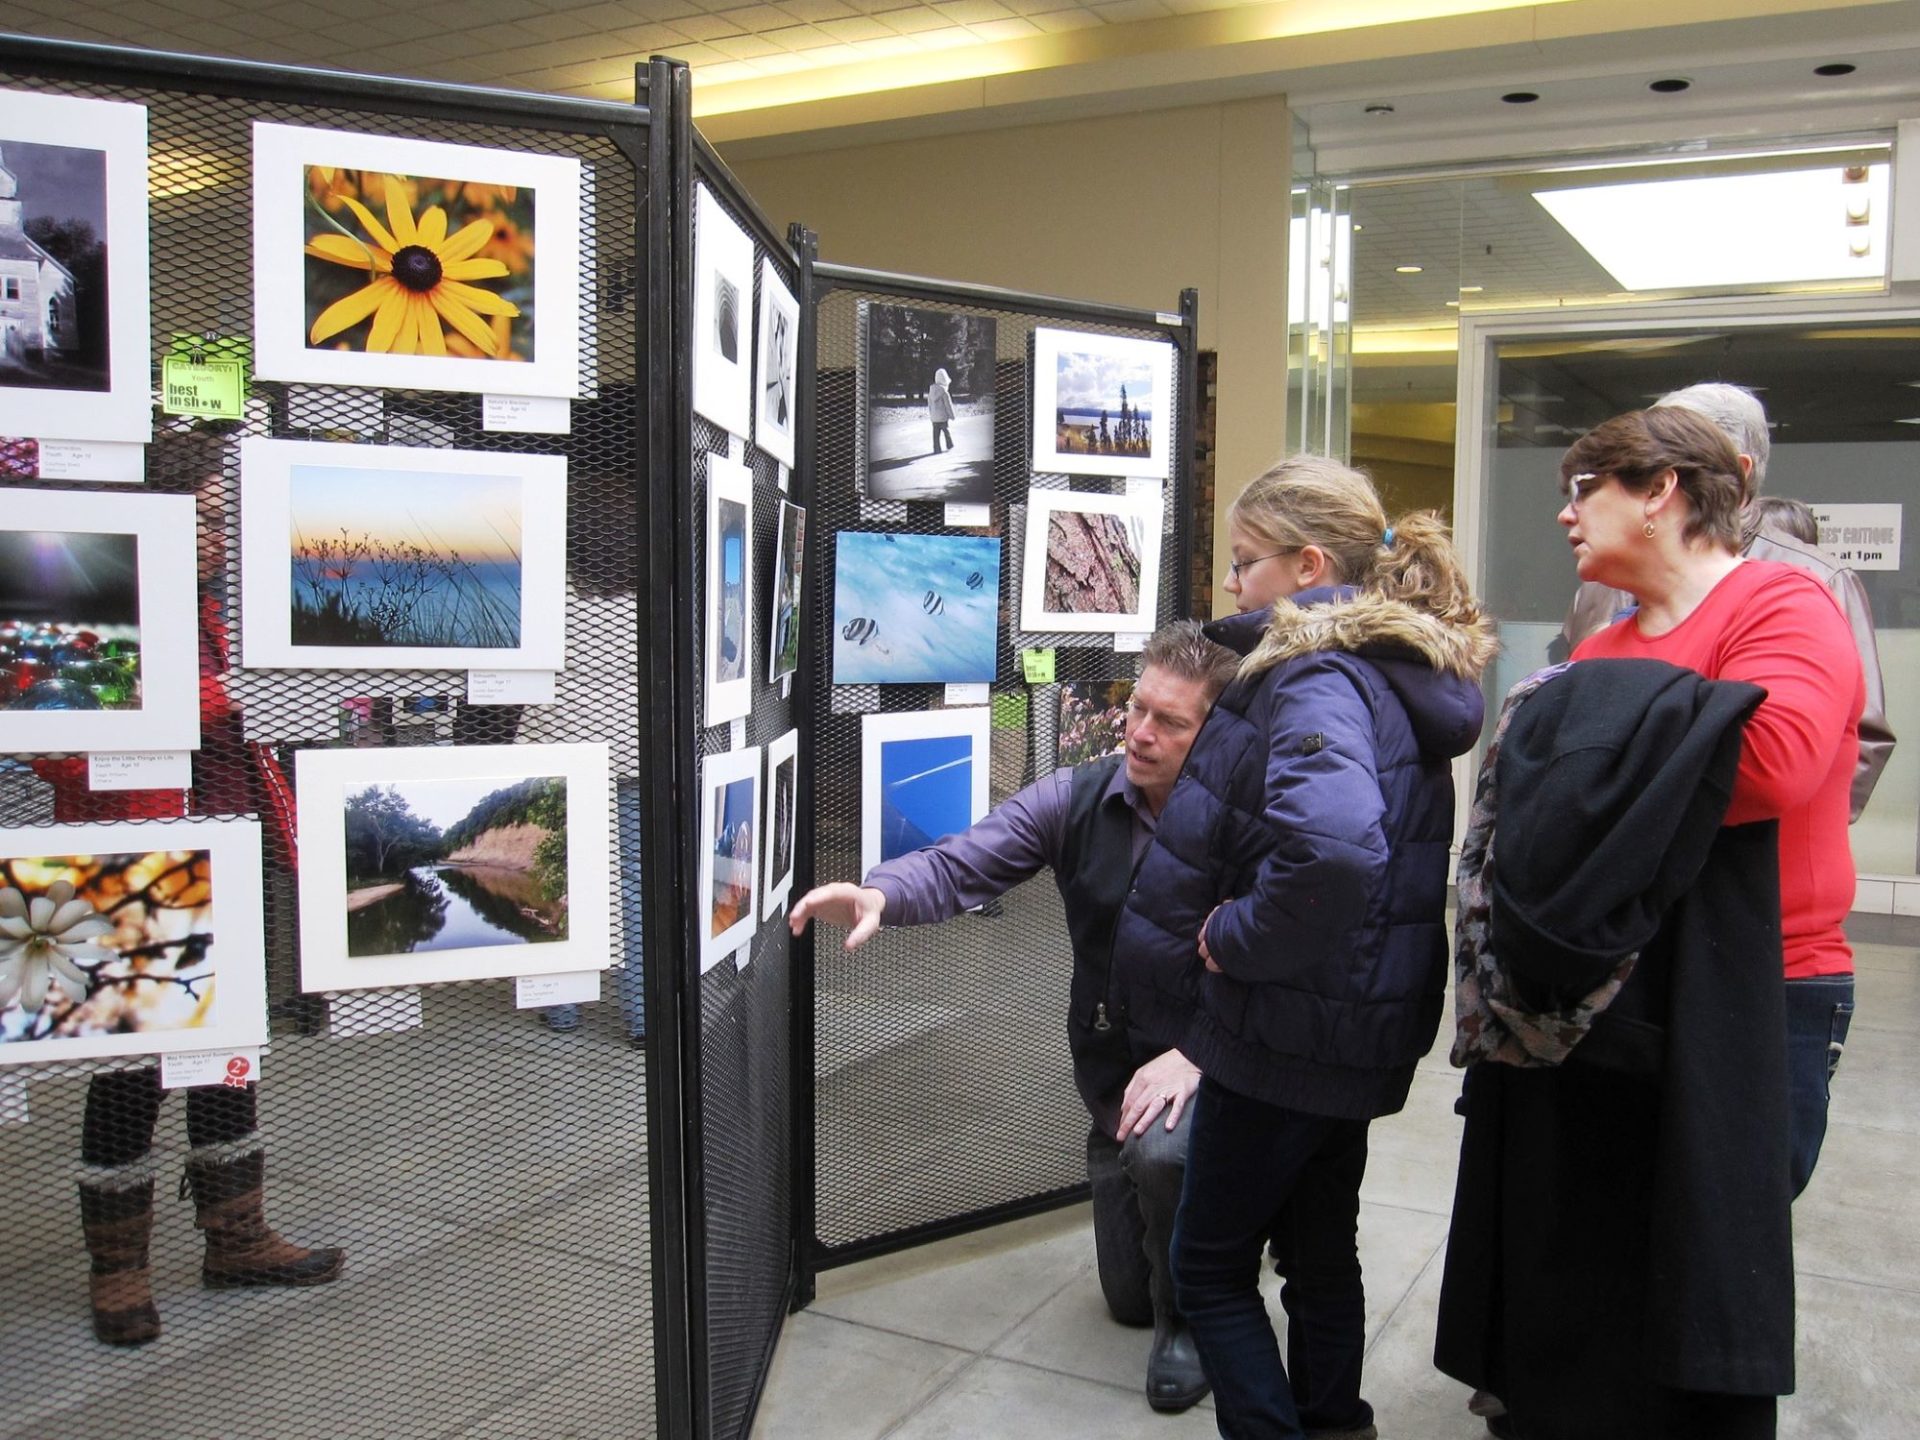 A group of people examining a display of photographs.